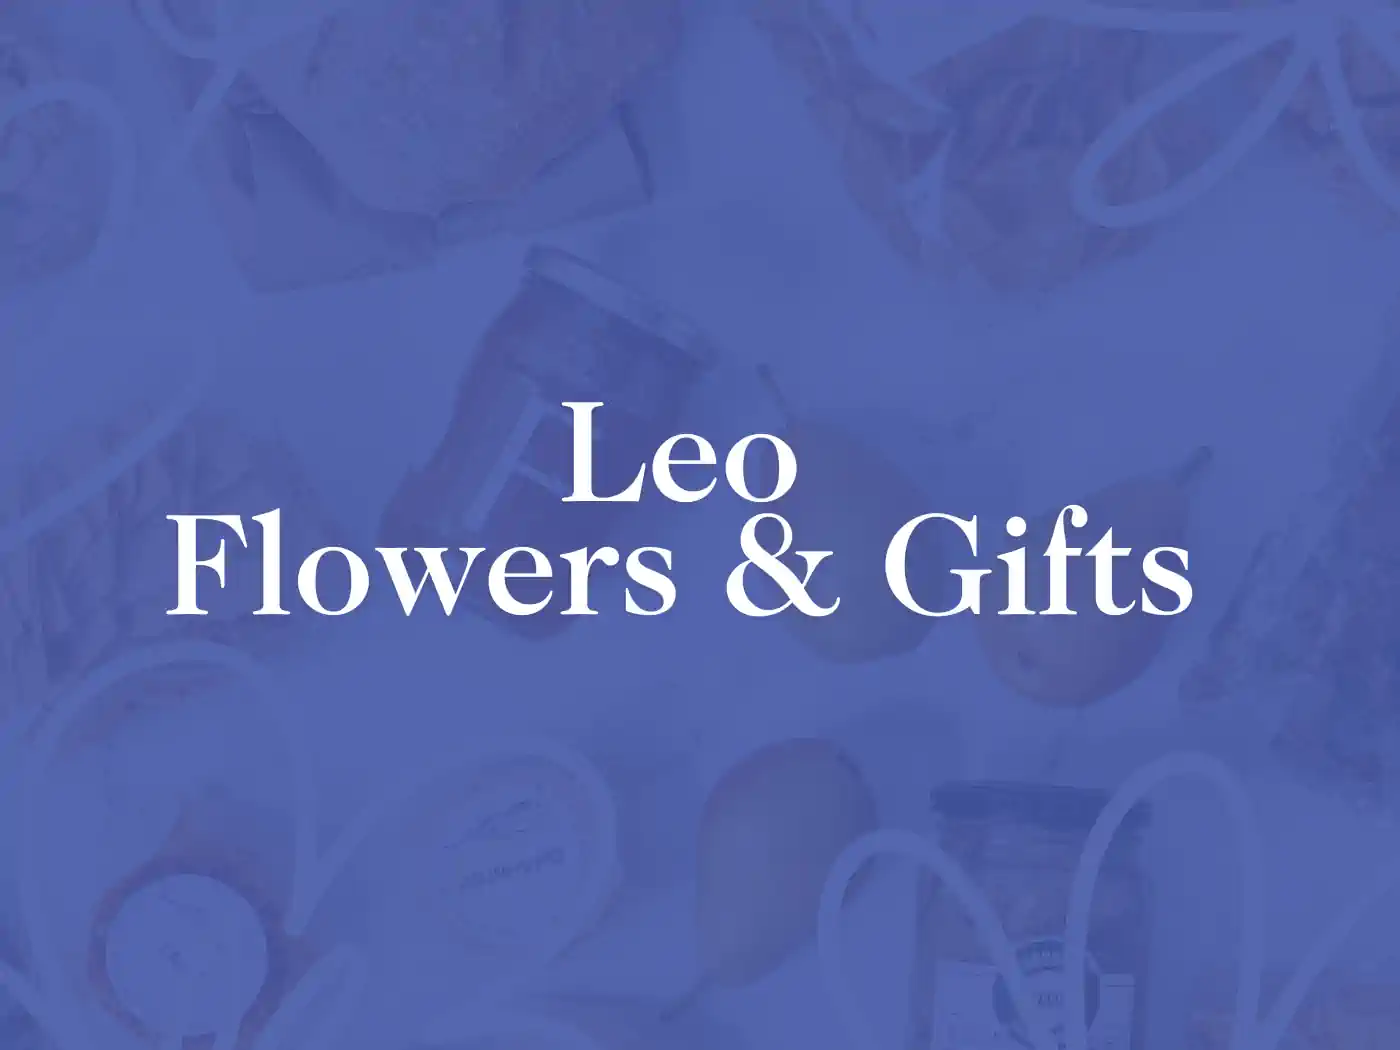 A variety of beautiful flowers and unique gifts displayed together. Fabulous Flowers and Gifts. Leo Flowers & Gifts Collection.